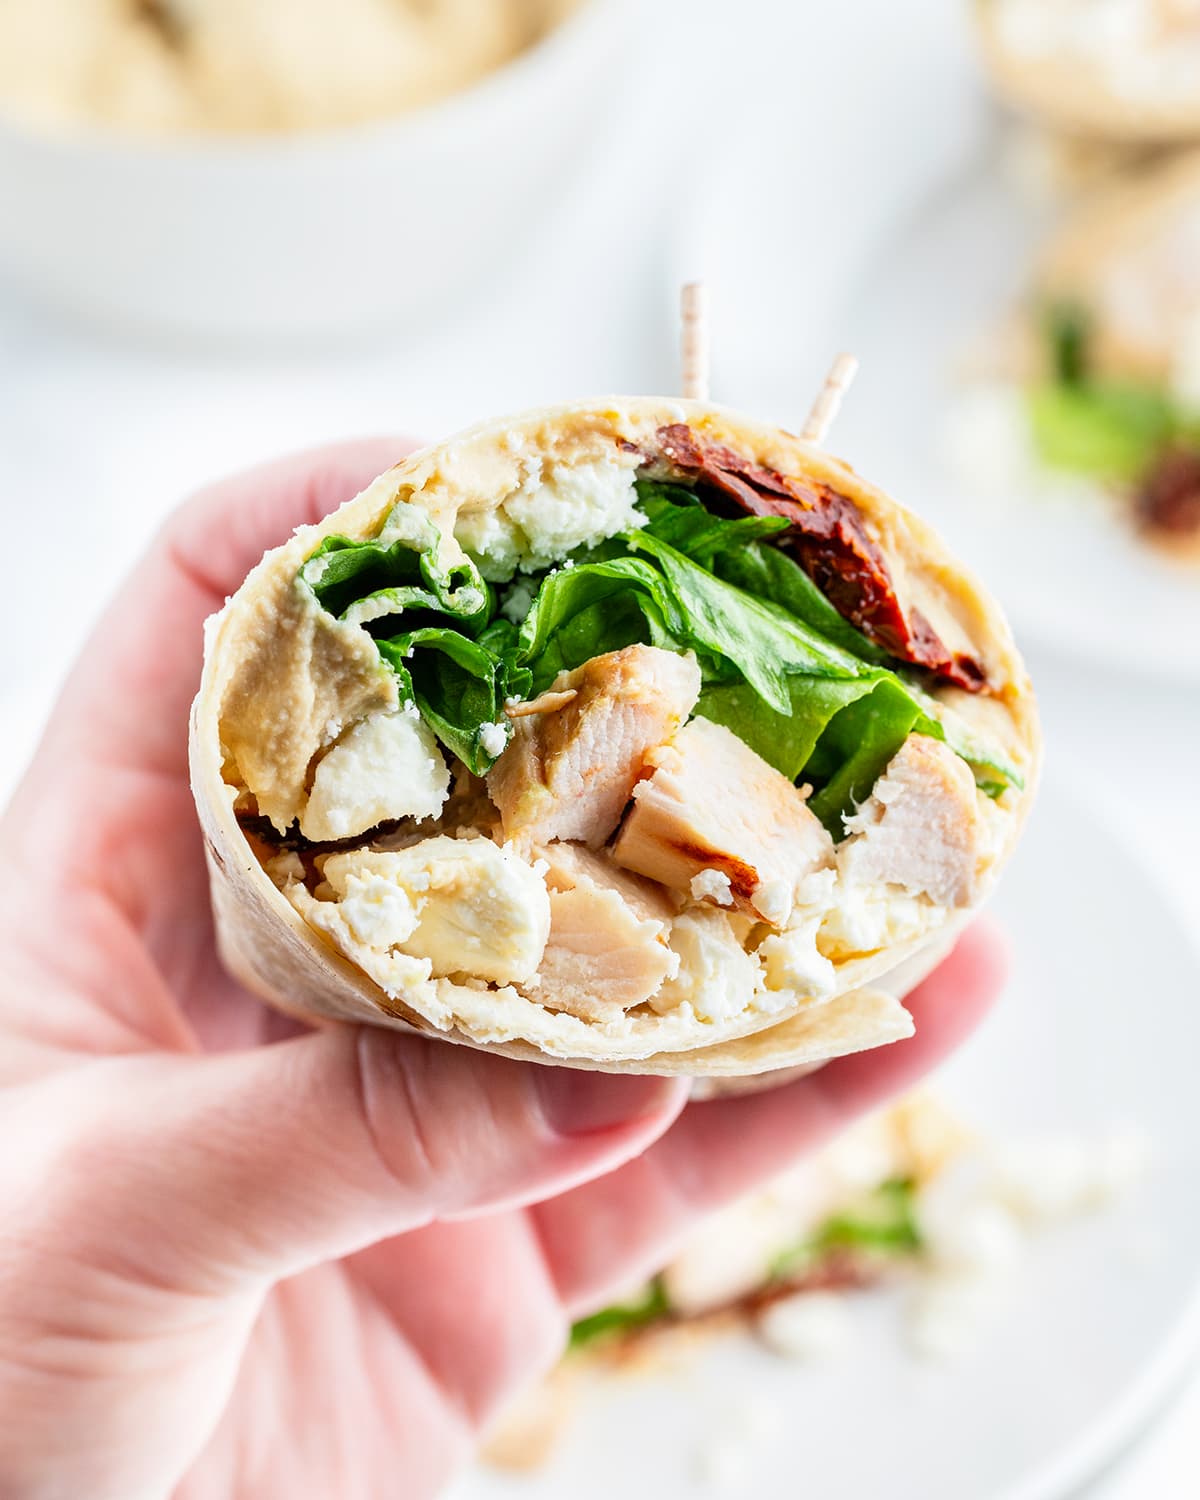 A hand holding half of a chicken wrap, full of lettuce, chicken, sundried tomatoes, and feta.